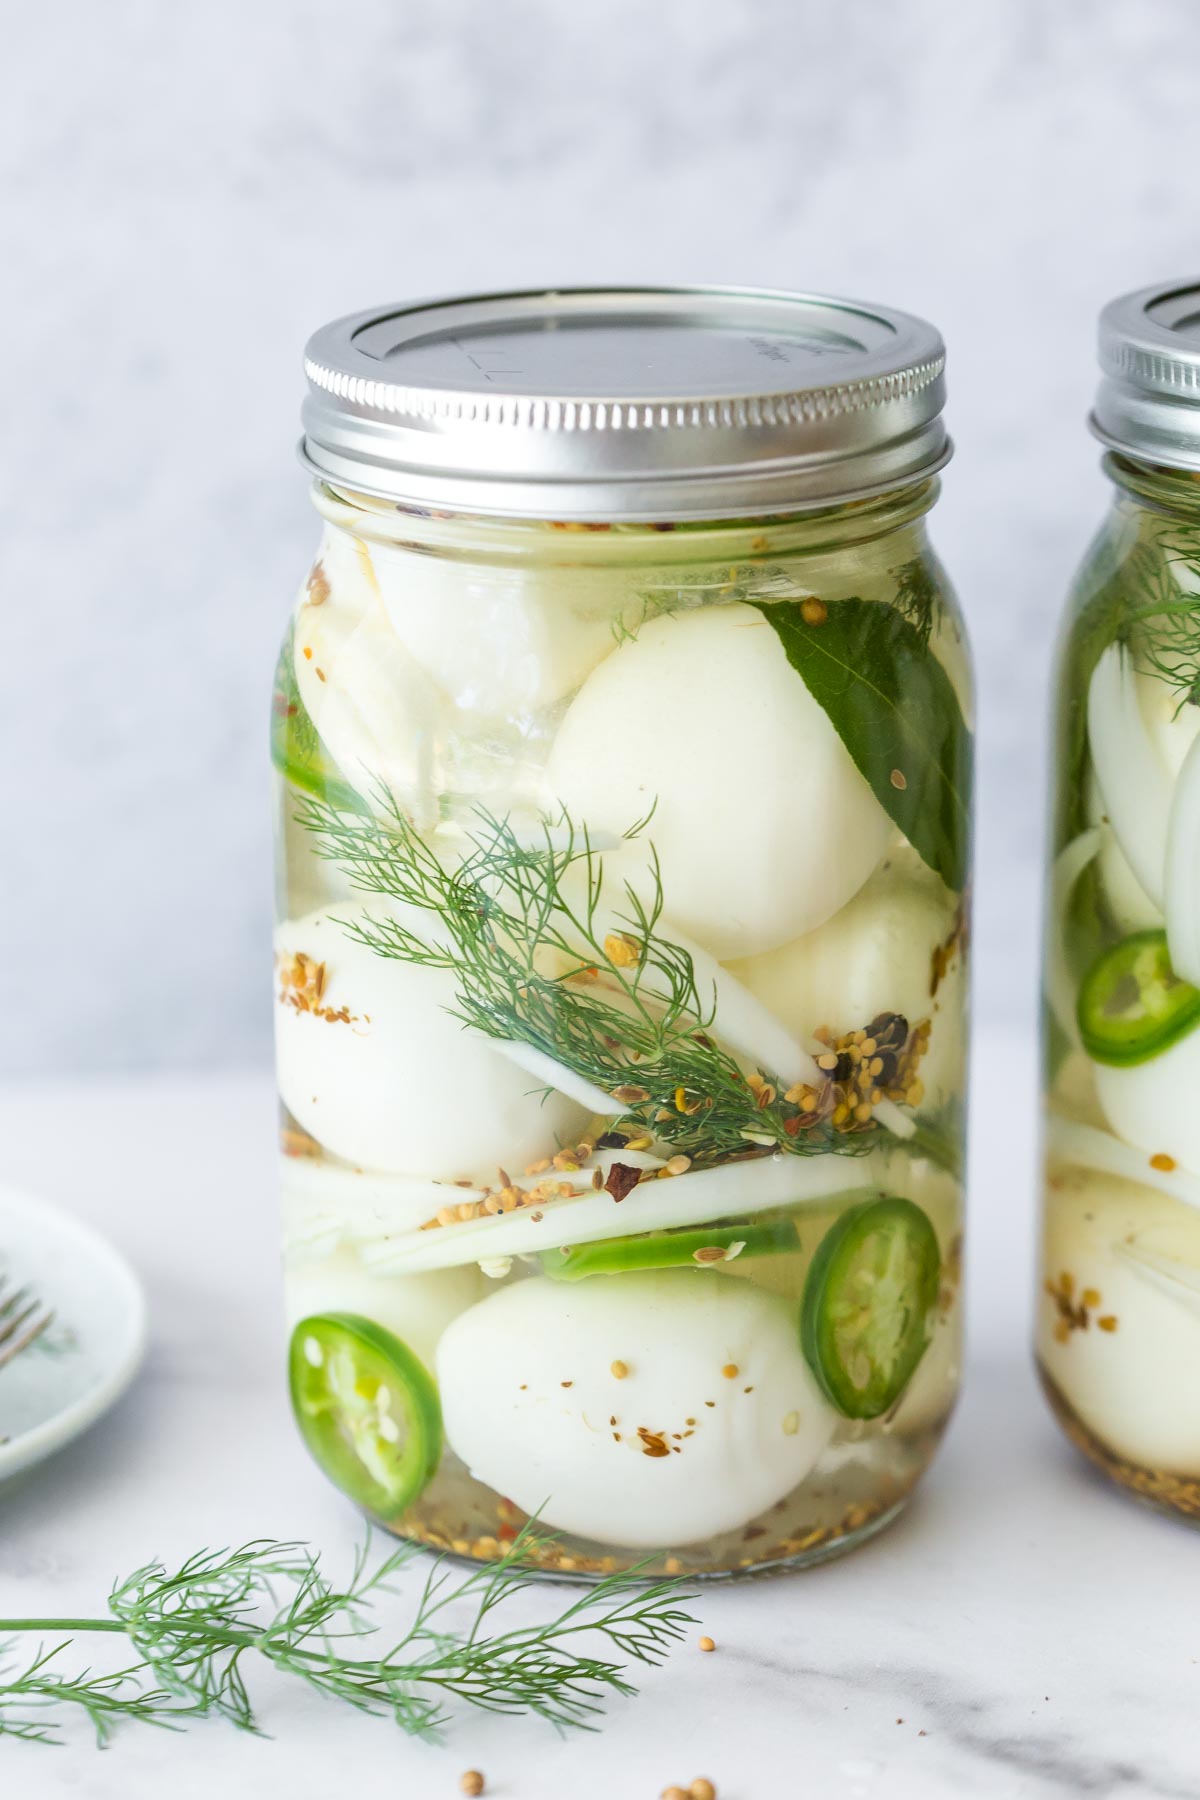 Spicy Pickled Eggs Recipe